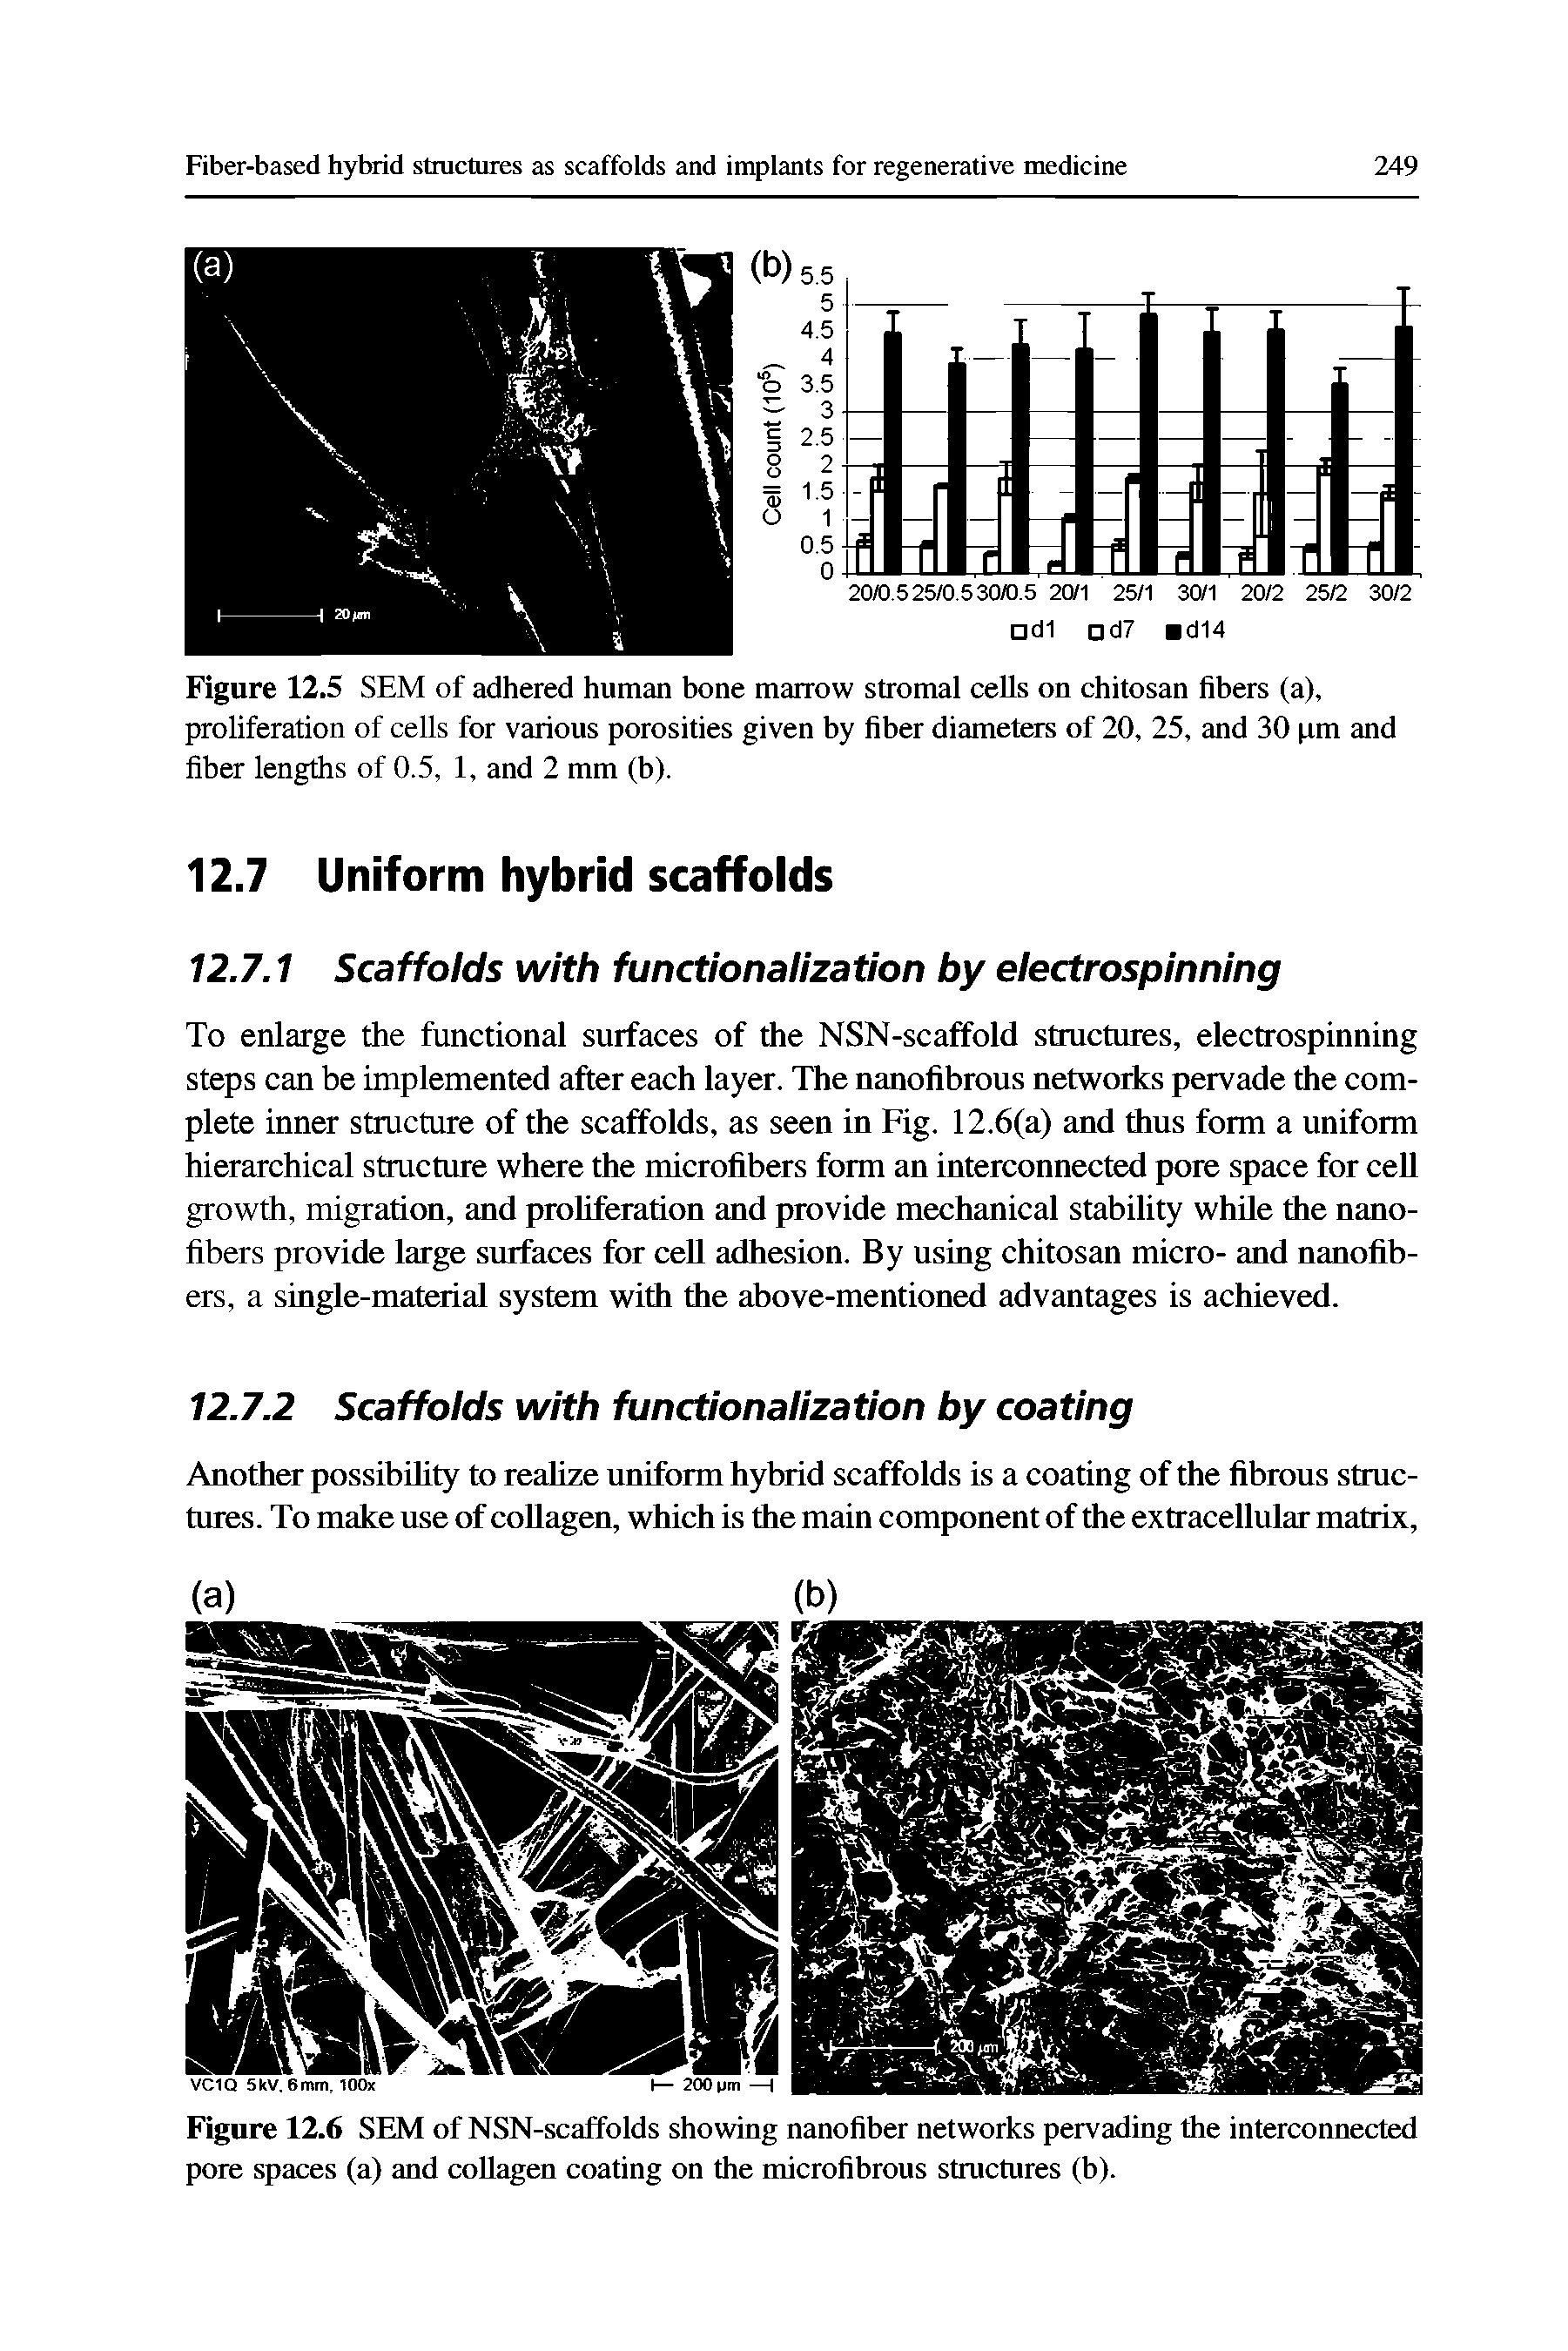 Figure 12.5 SEM of adhered human bone marrow stromal cells on chitosan fibers (a), proliferation of cells for various porosities given by fiber diameters of 20, 25, and 30 pm and...